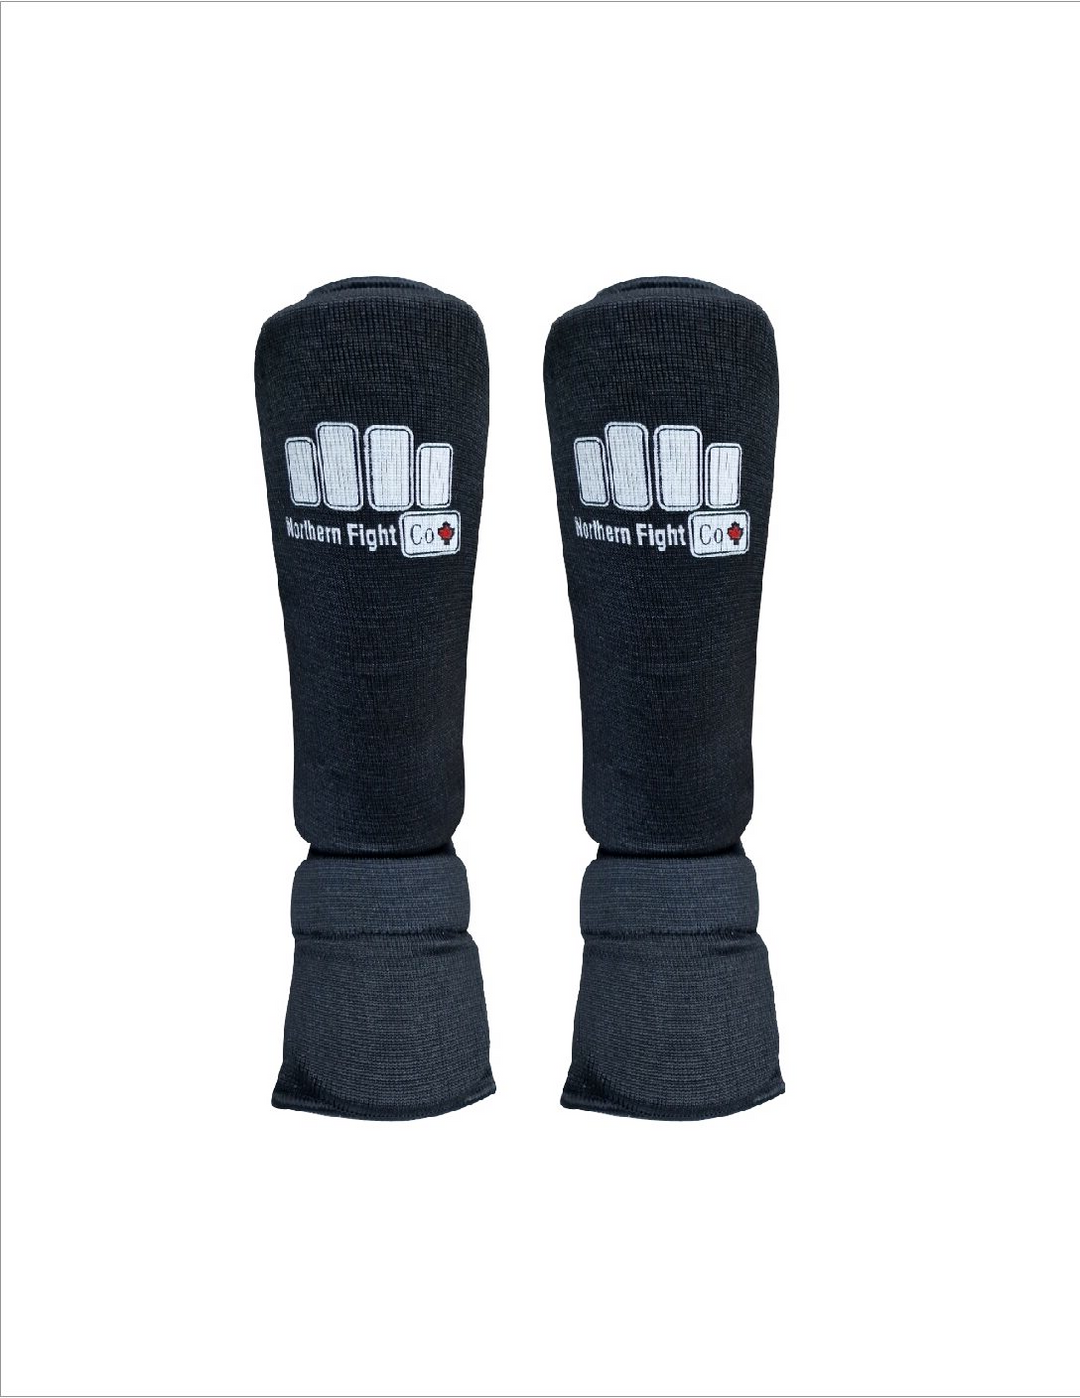 Northern Fight Co Cloth Shinguards